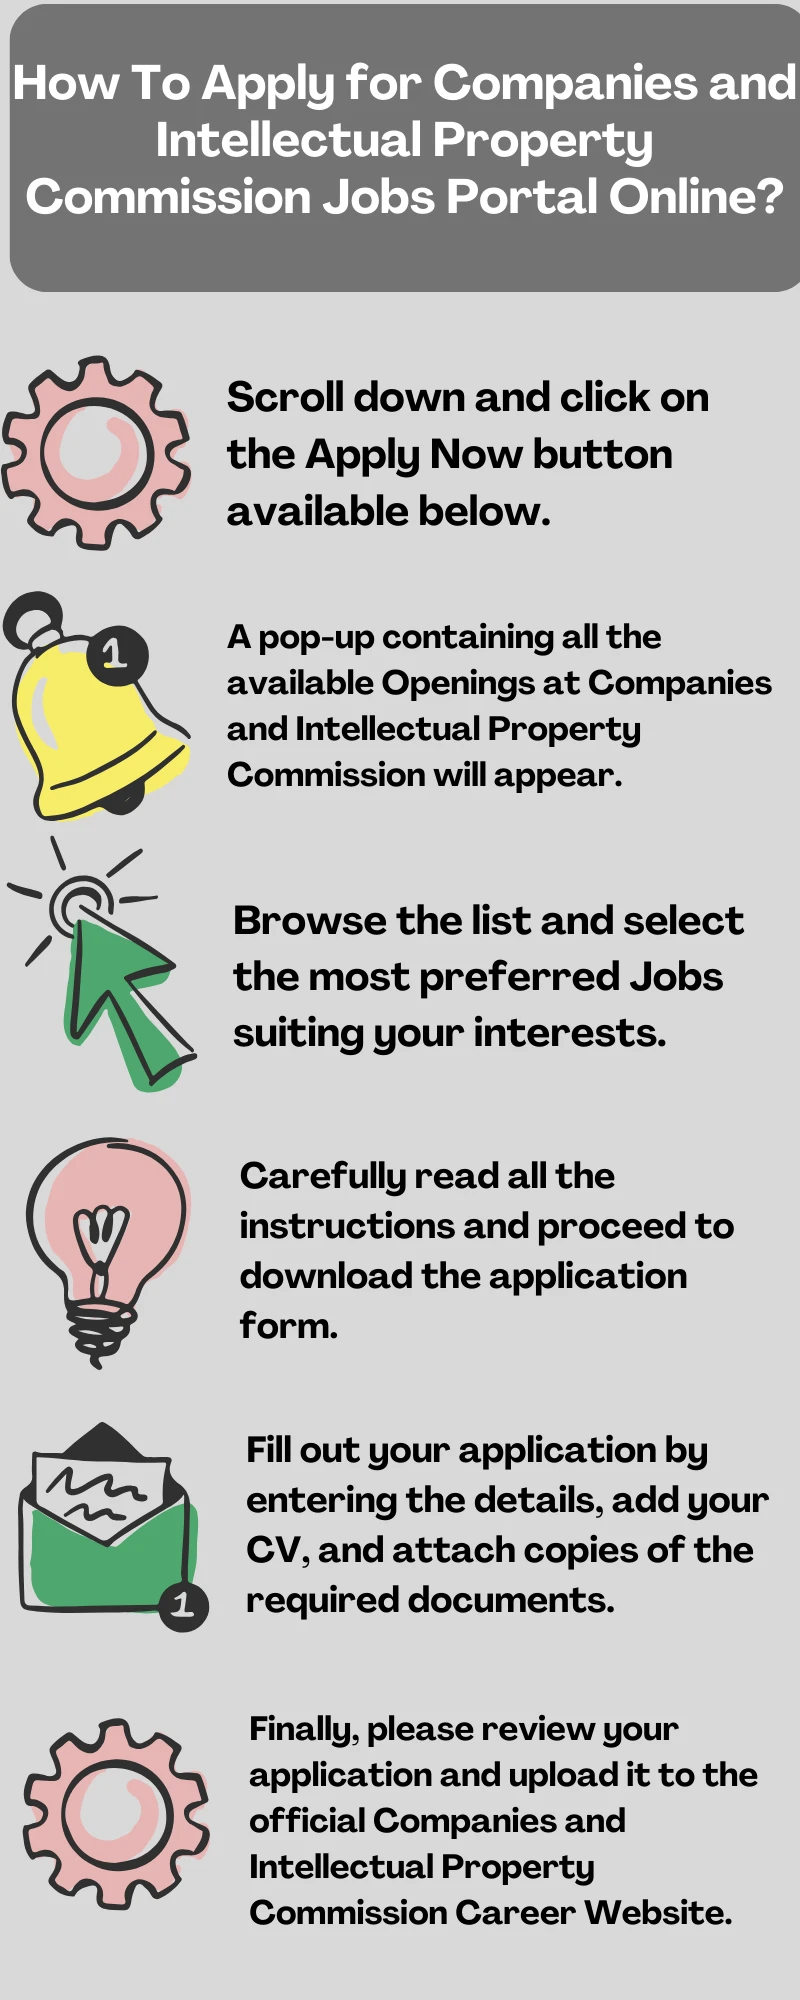 How To Apply for Companies and Intellectual Property Commission Jobs Portal Online?